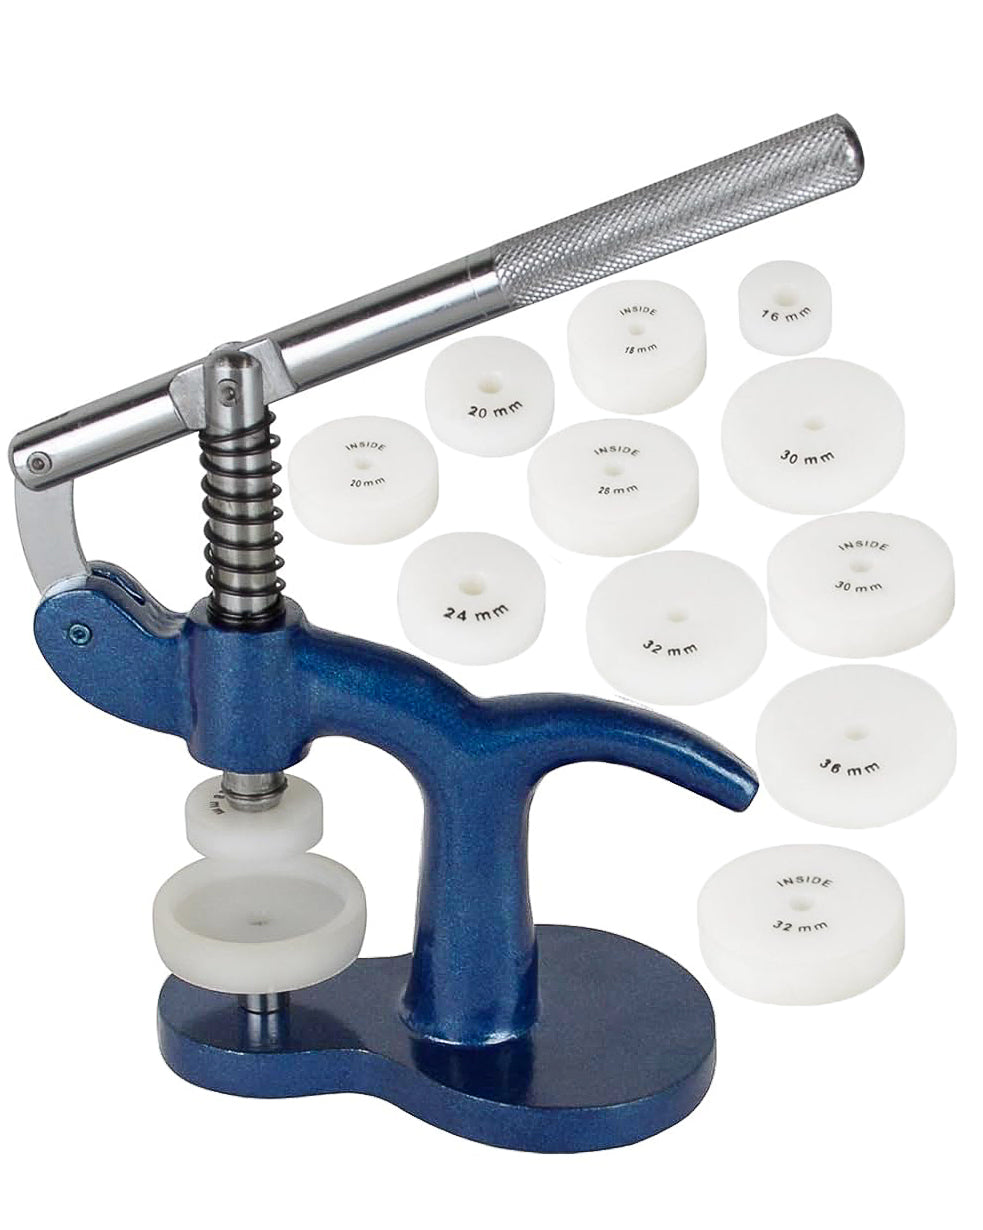 <transcy>Swiss Style Watch Glass Stem Kit (Press) with 12 Very Soft Nylon Dies for mounting flat mineral glasses and backs (Case back) of quartz watches</transcy>